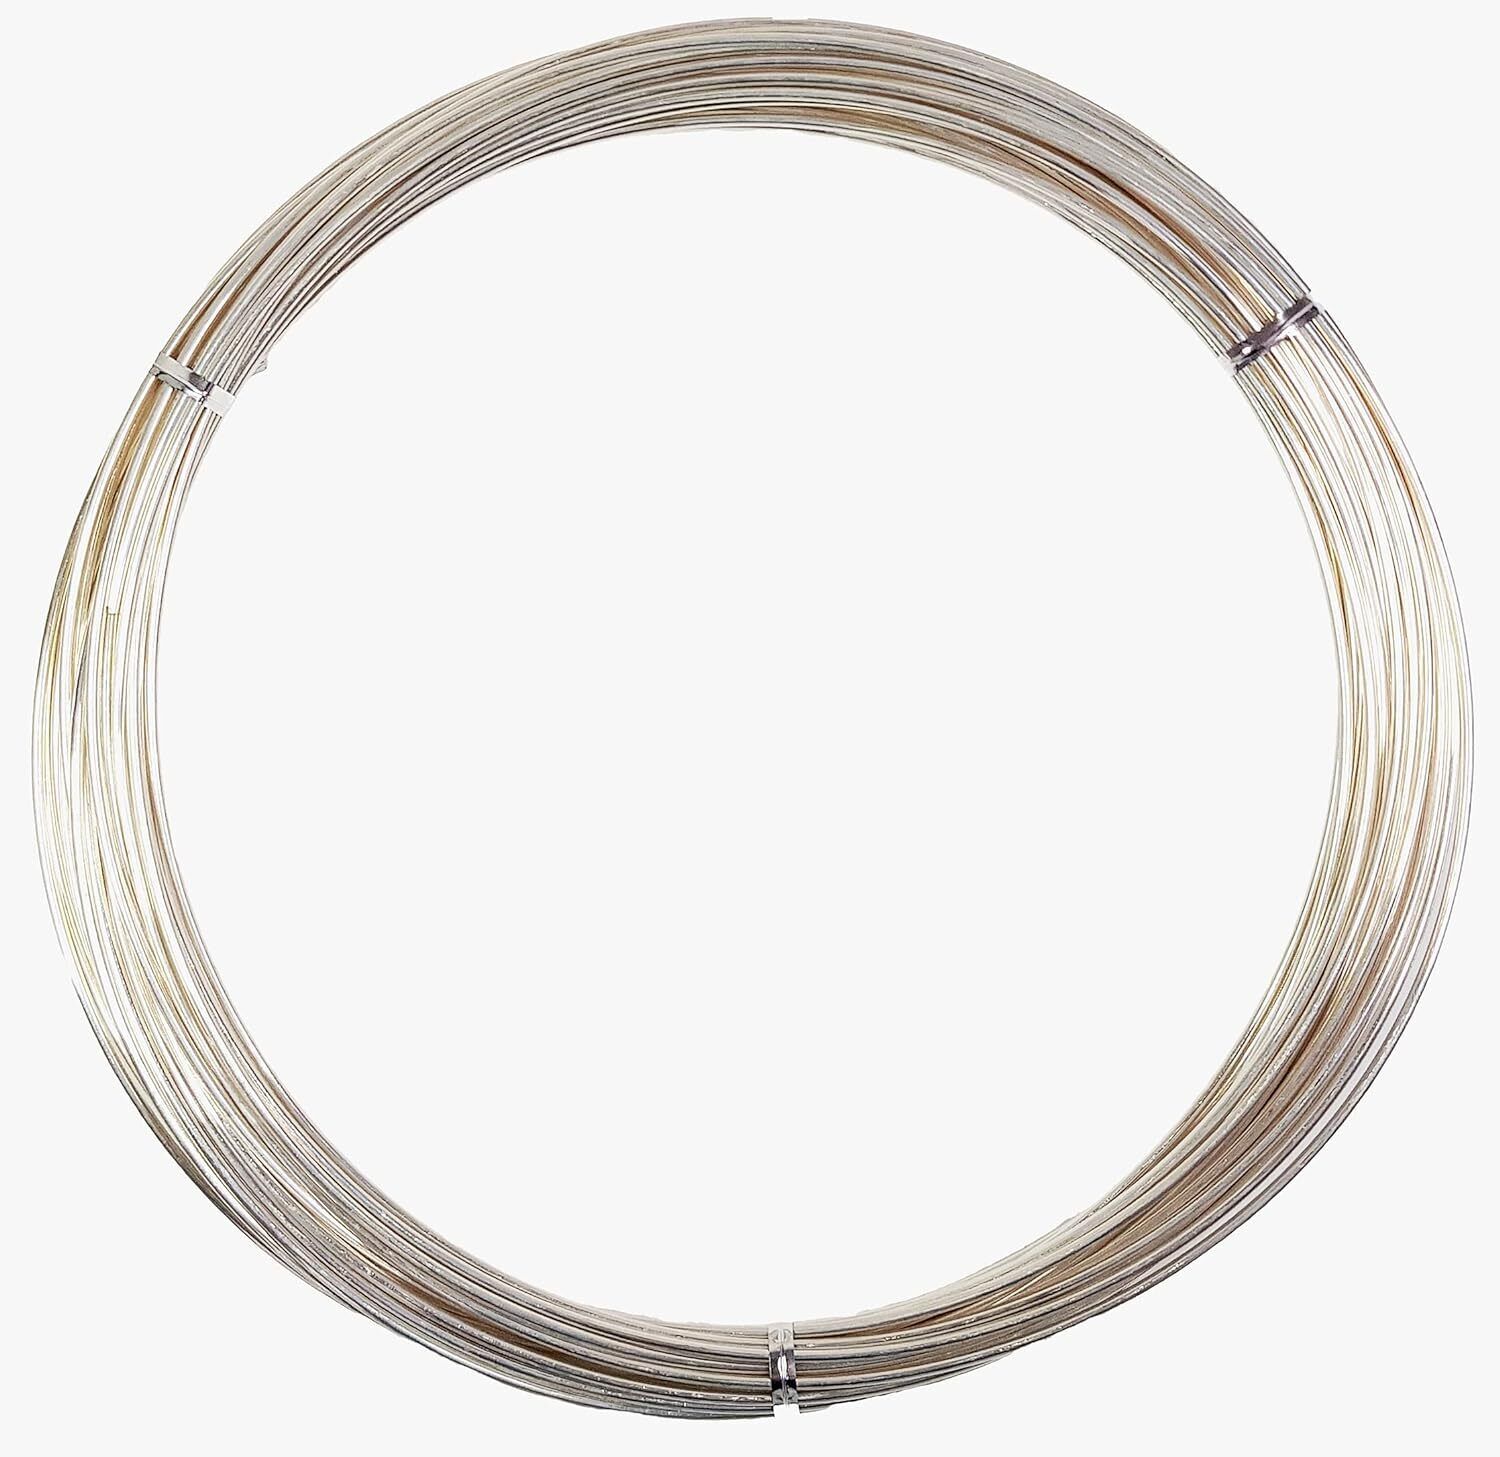 8 Gauge, Half Round, Dead Soft, 925 Sterling Silver Wire - 3 FT - for Jewelry